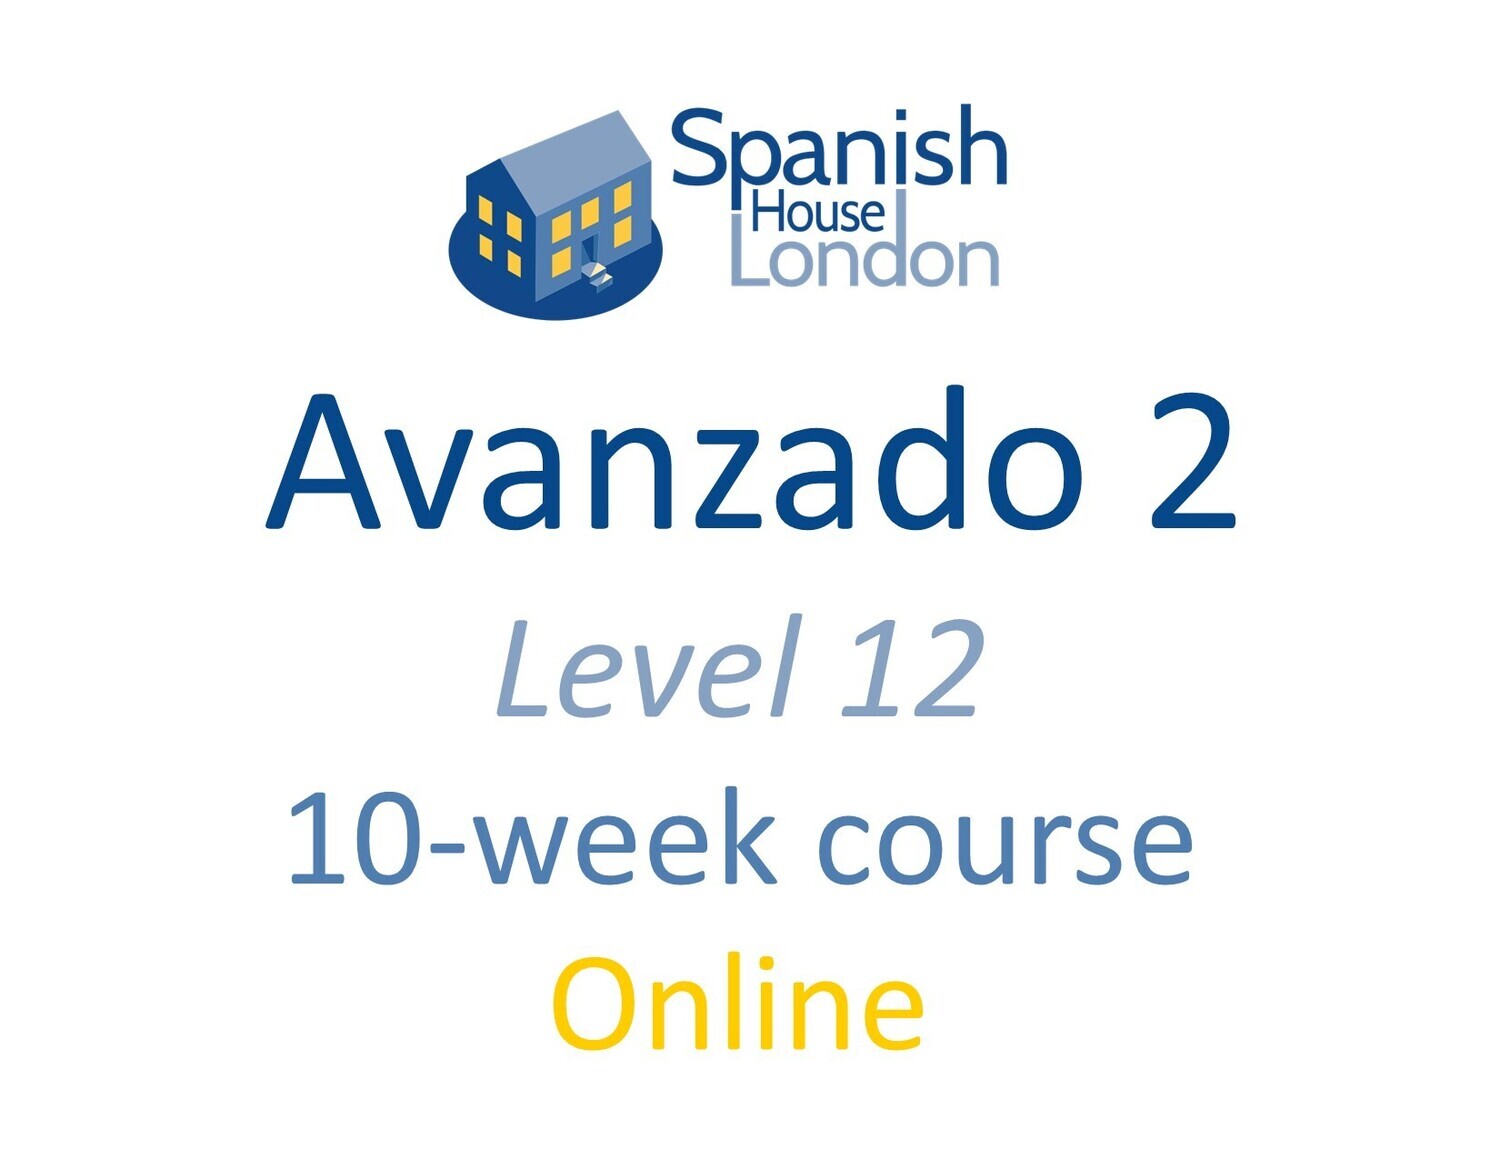 Avanzado 2 Course starting on 3rd October at 7.30pm